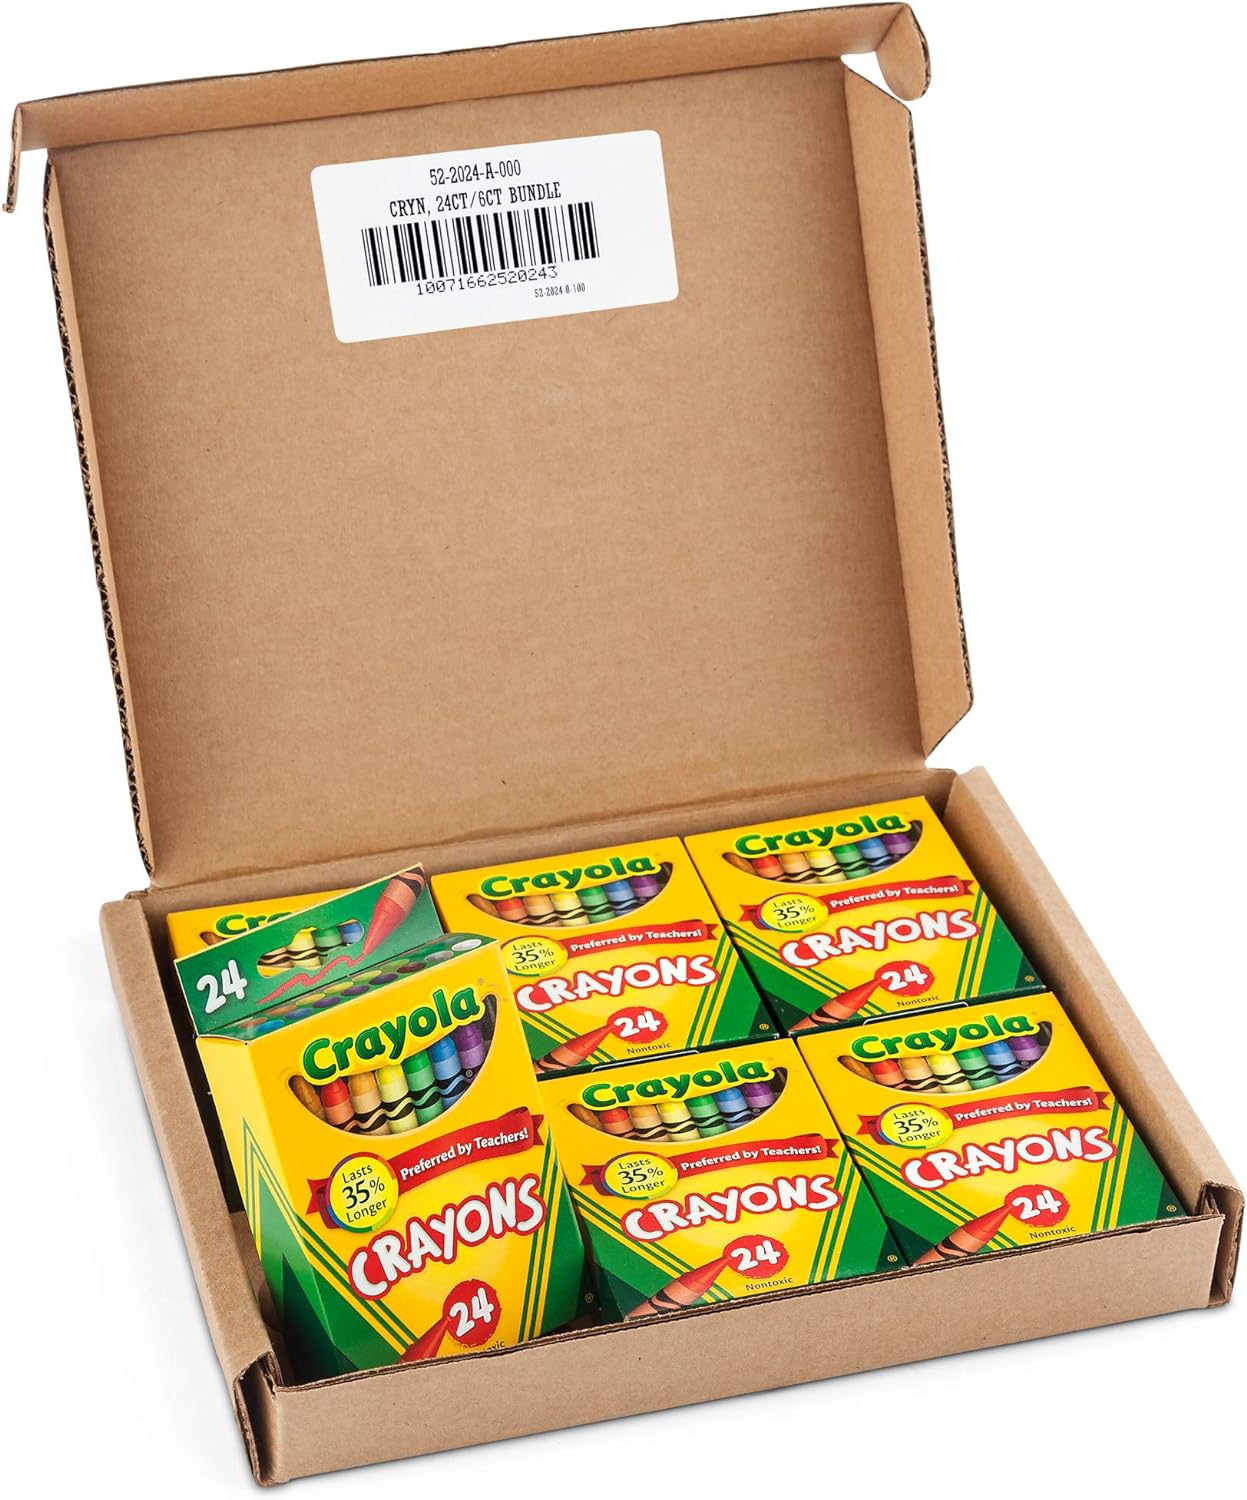 Crayola Crayons, Bulk School Supplies For Kids, 24 Count Crayon Box (Pack Of 6), Assorted Colors